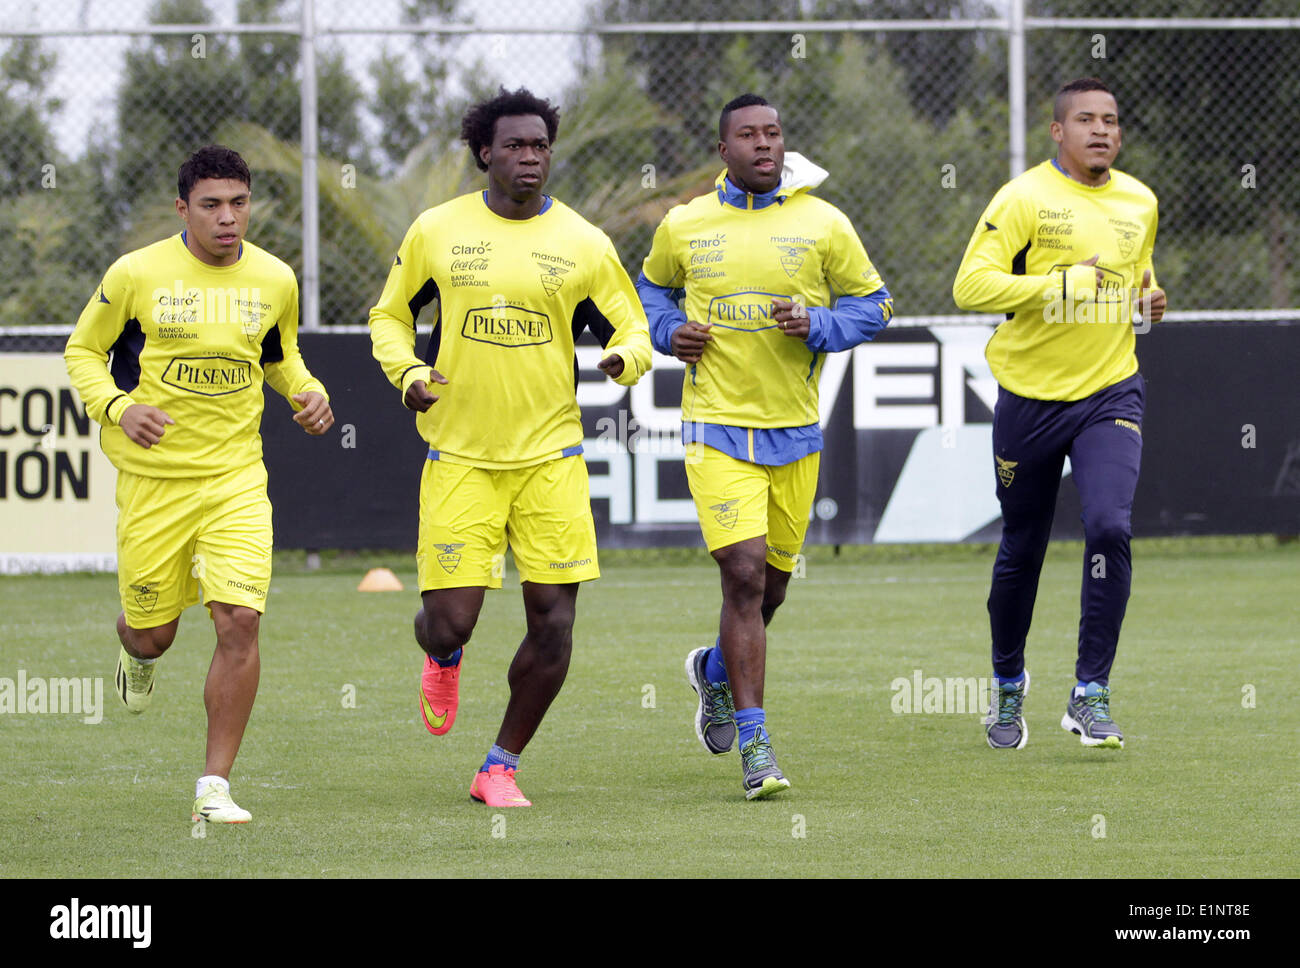 Quito, Ecuador. 7th June, 2014. Players of the Ecuadorian national soccer team take part in a training session at the team's headquarters in Quito, capital of Ecuador, on June 7, 2014. The Ecuadorian national soccer team is training for the World Cup Brazil 2014. © Str/Xinhua/Alamy Live News Stock Photo